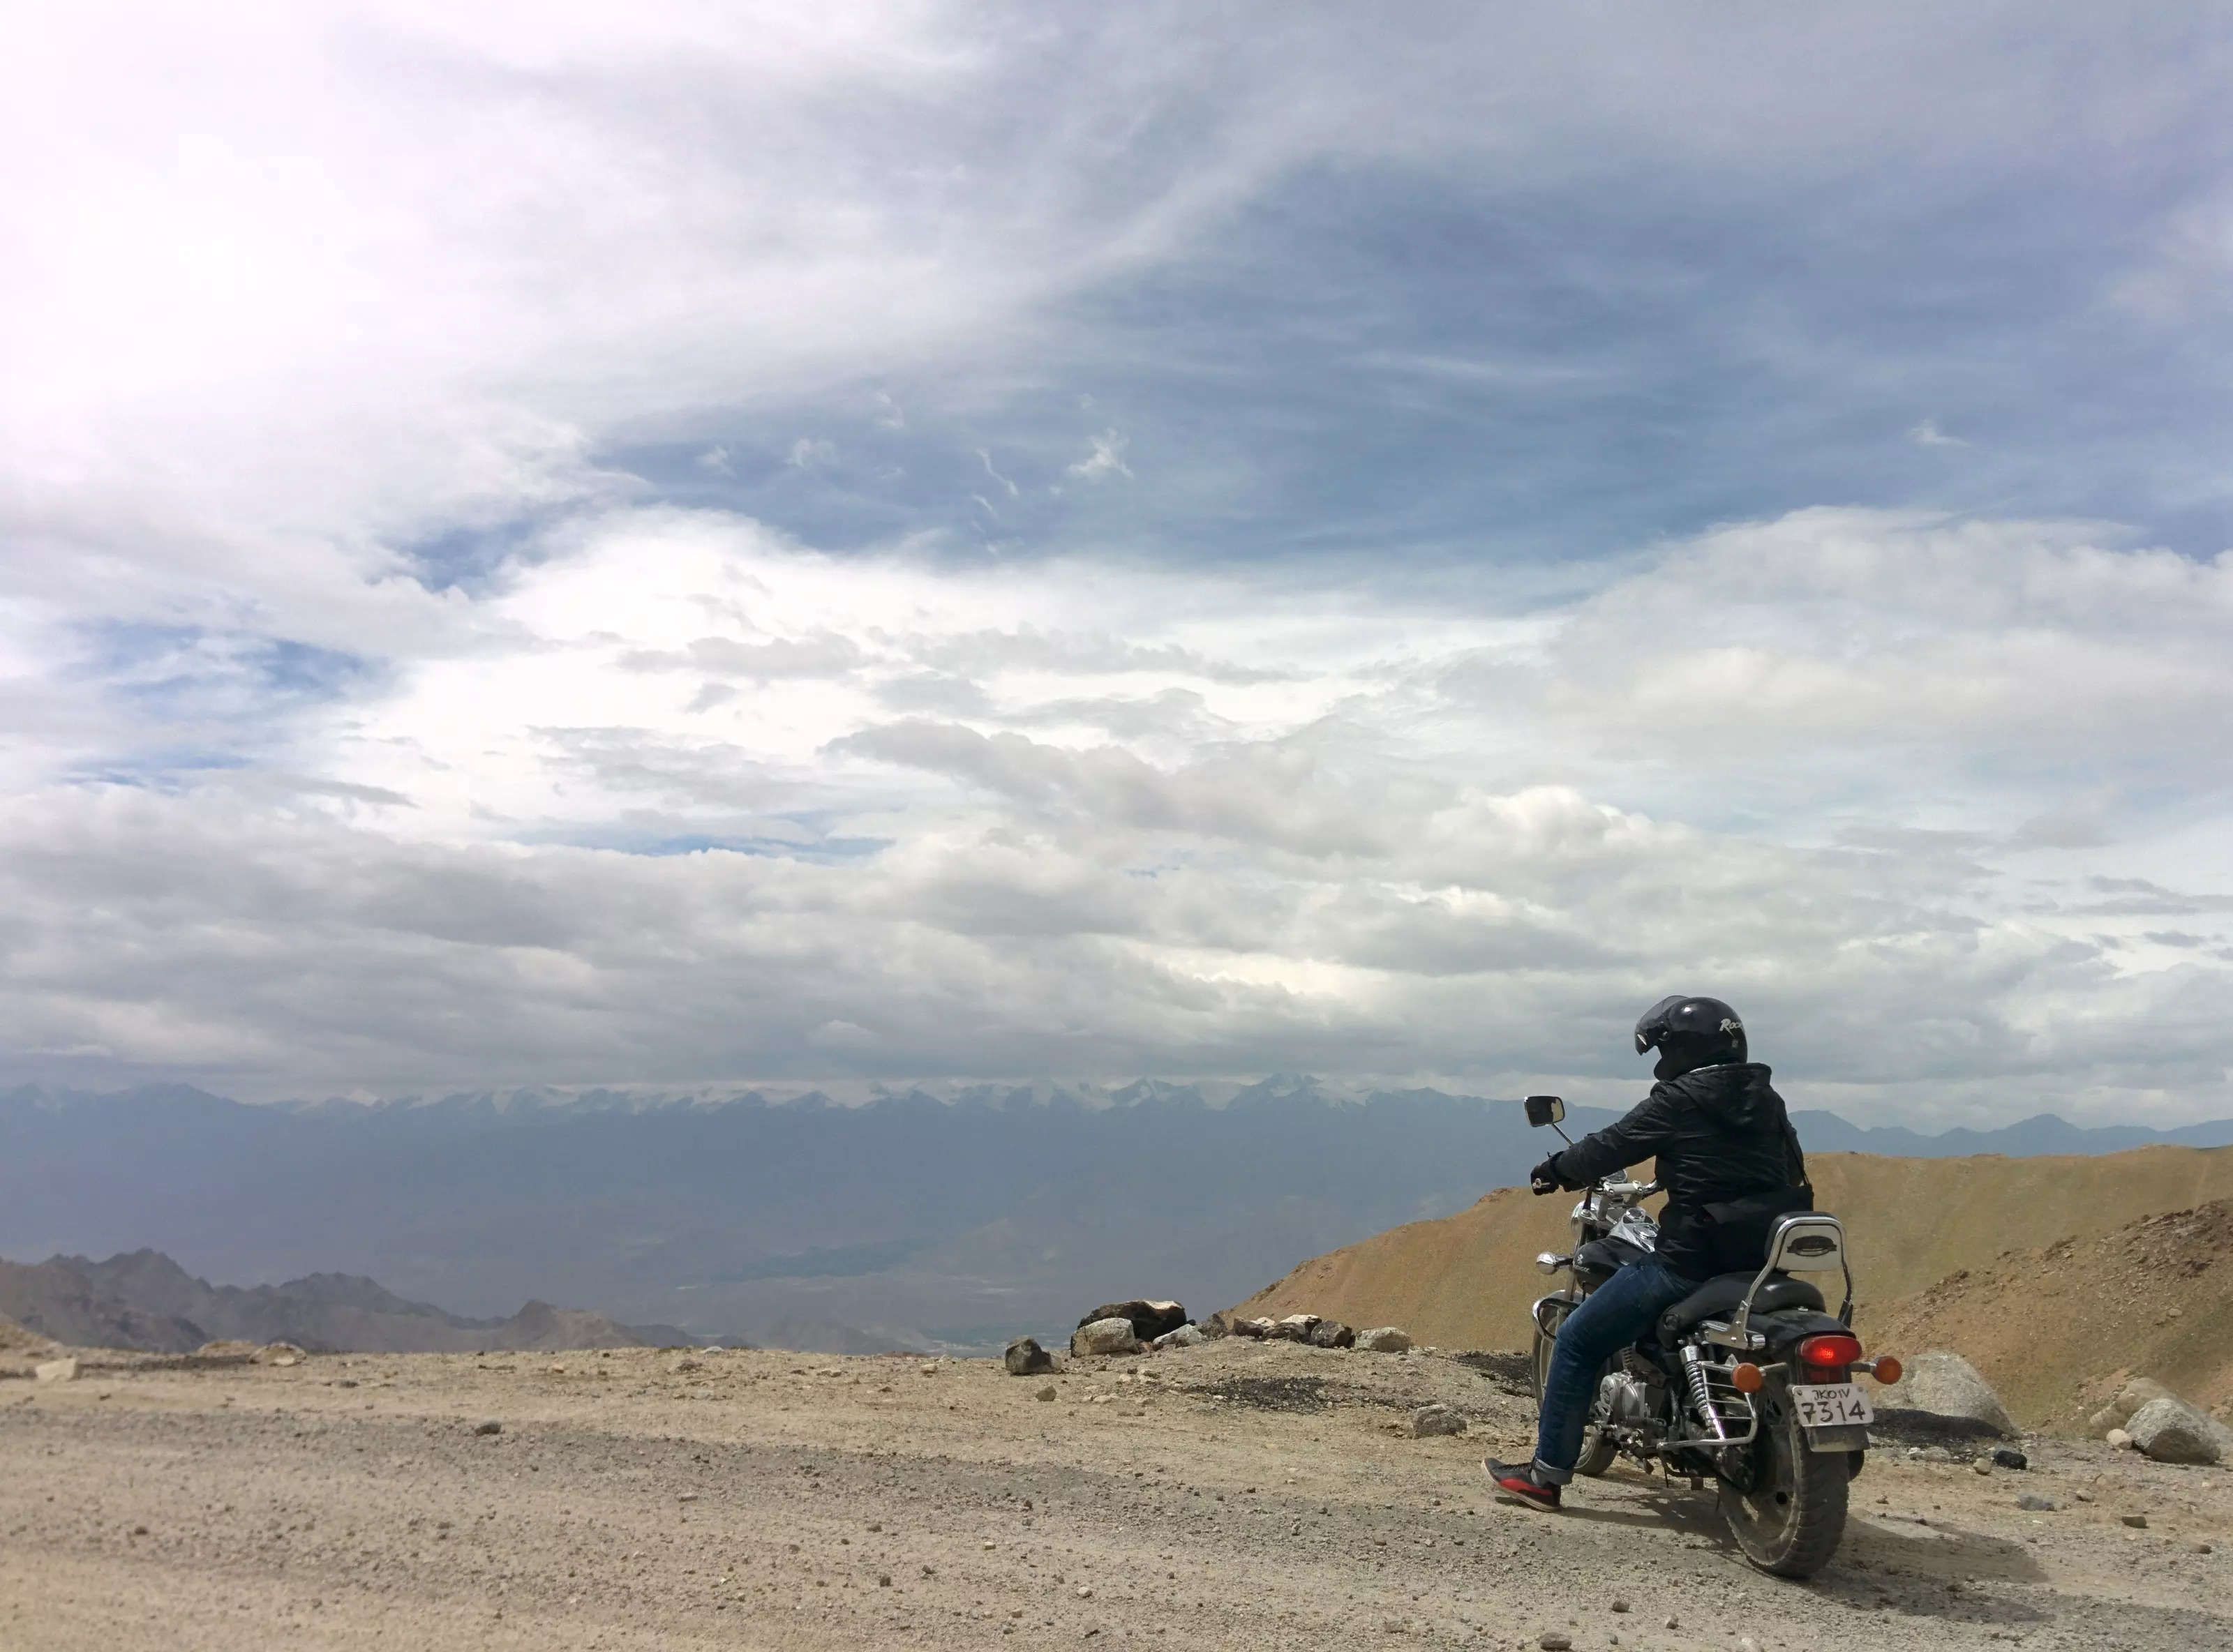 Ladakh is also known as the land of high passes, hence most of the places of interest are situated above an altitude of 10,000 feet, which can induce AMS if a person has not rested well